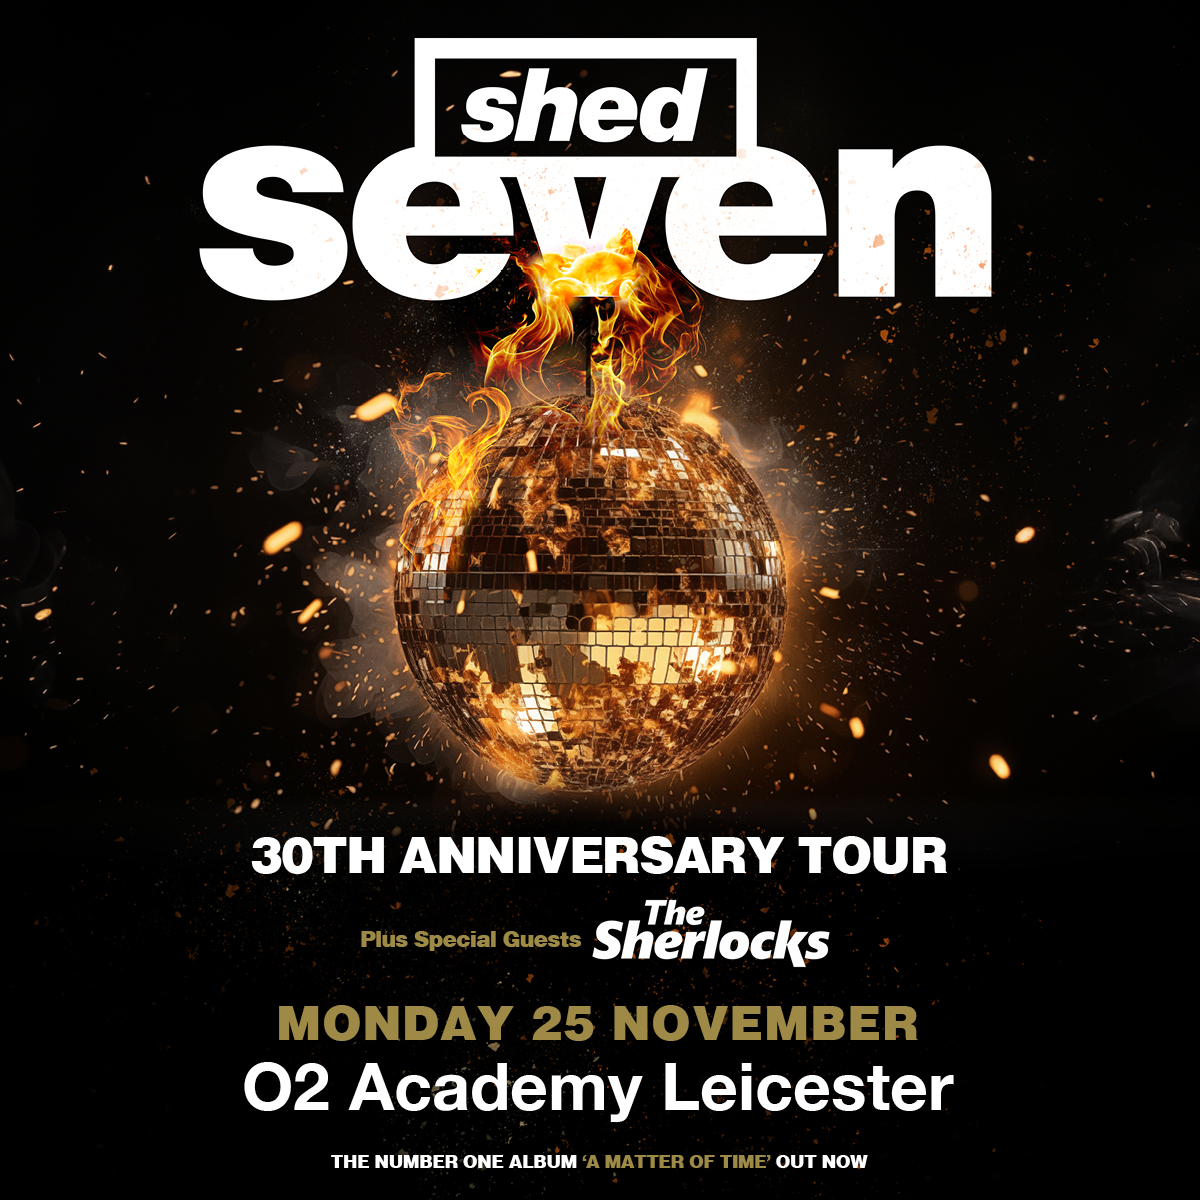 Tickets are shifting fast! If you wanna join us for @shedseven - 30th-anniversary tour on Monday 25 November, hit the link - amg-venues.com/BeO250Rn4fQ